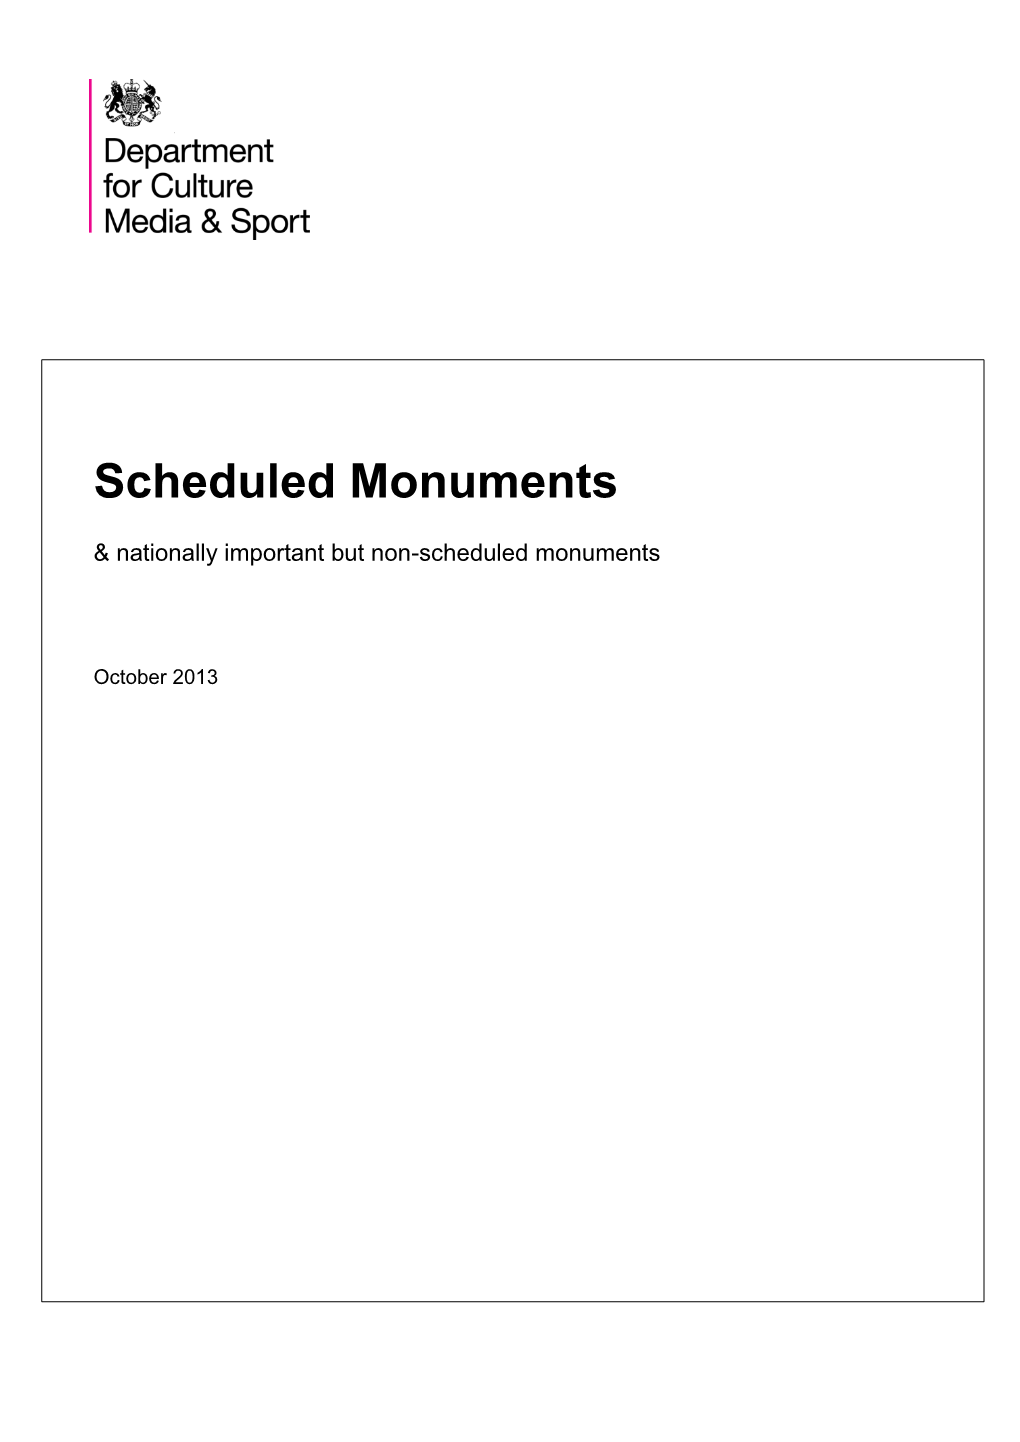 Scheduled Monuments